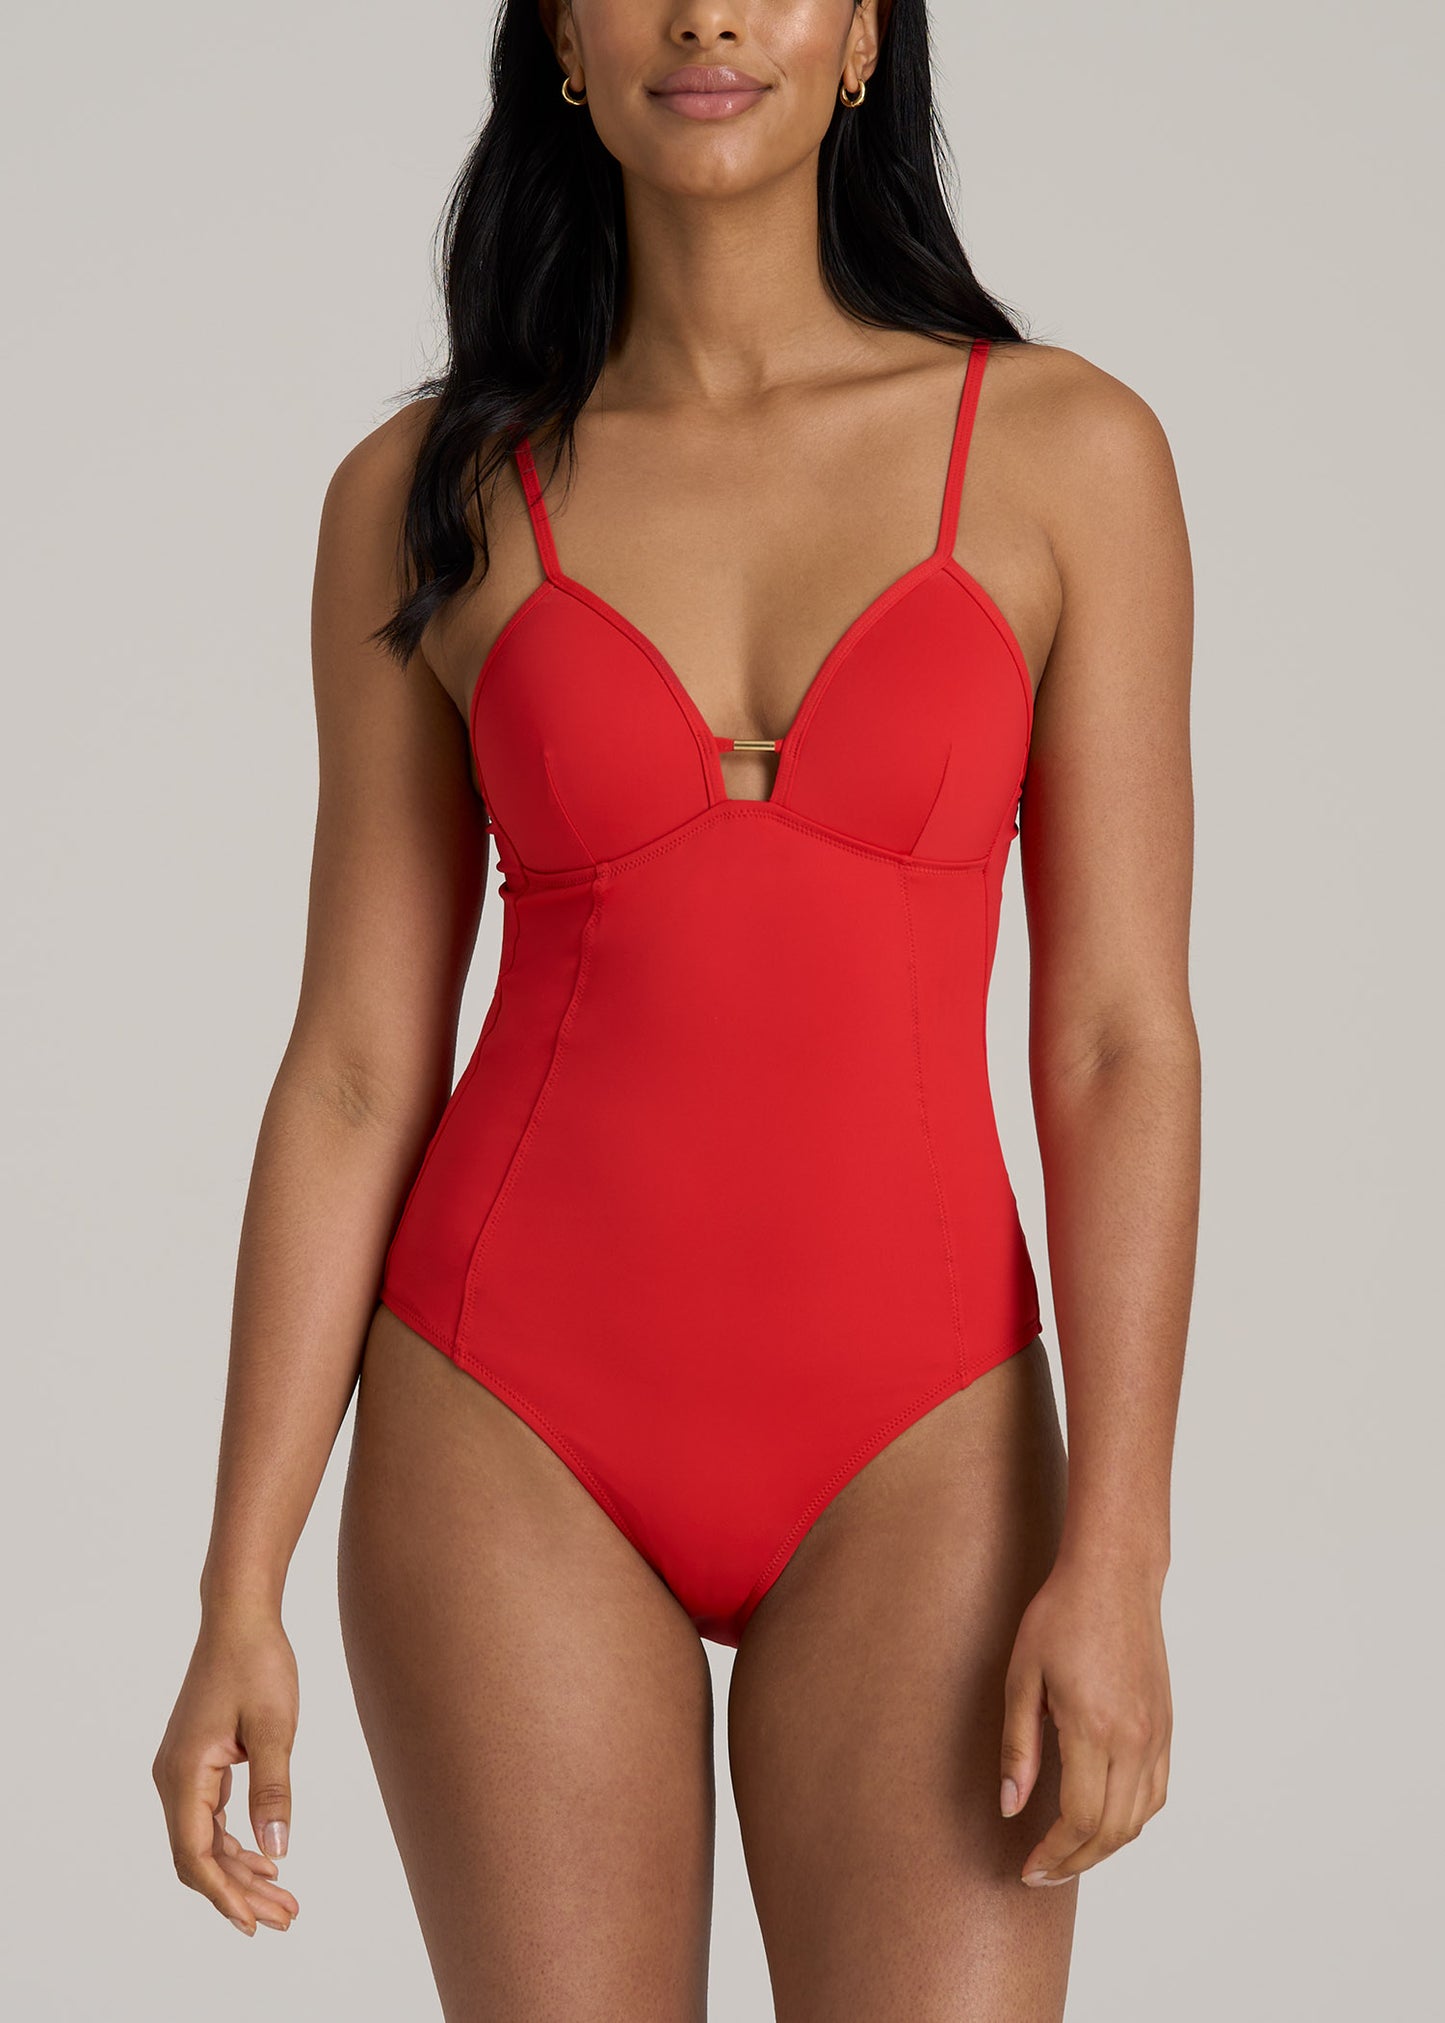 Low Cut One-Piece Swimsuit for Tall Women in Radiant Red